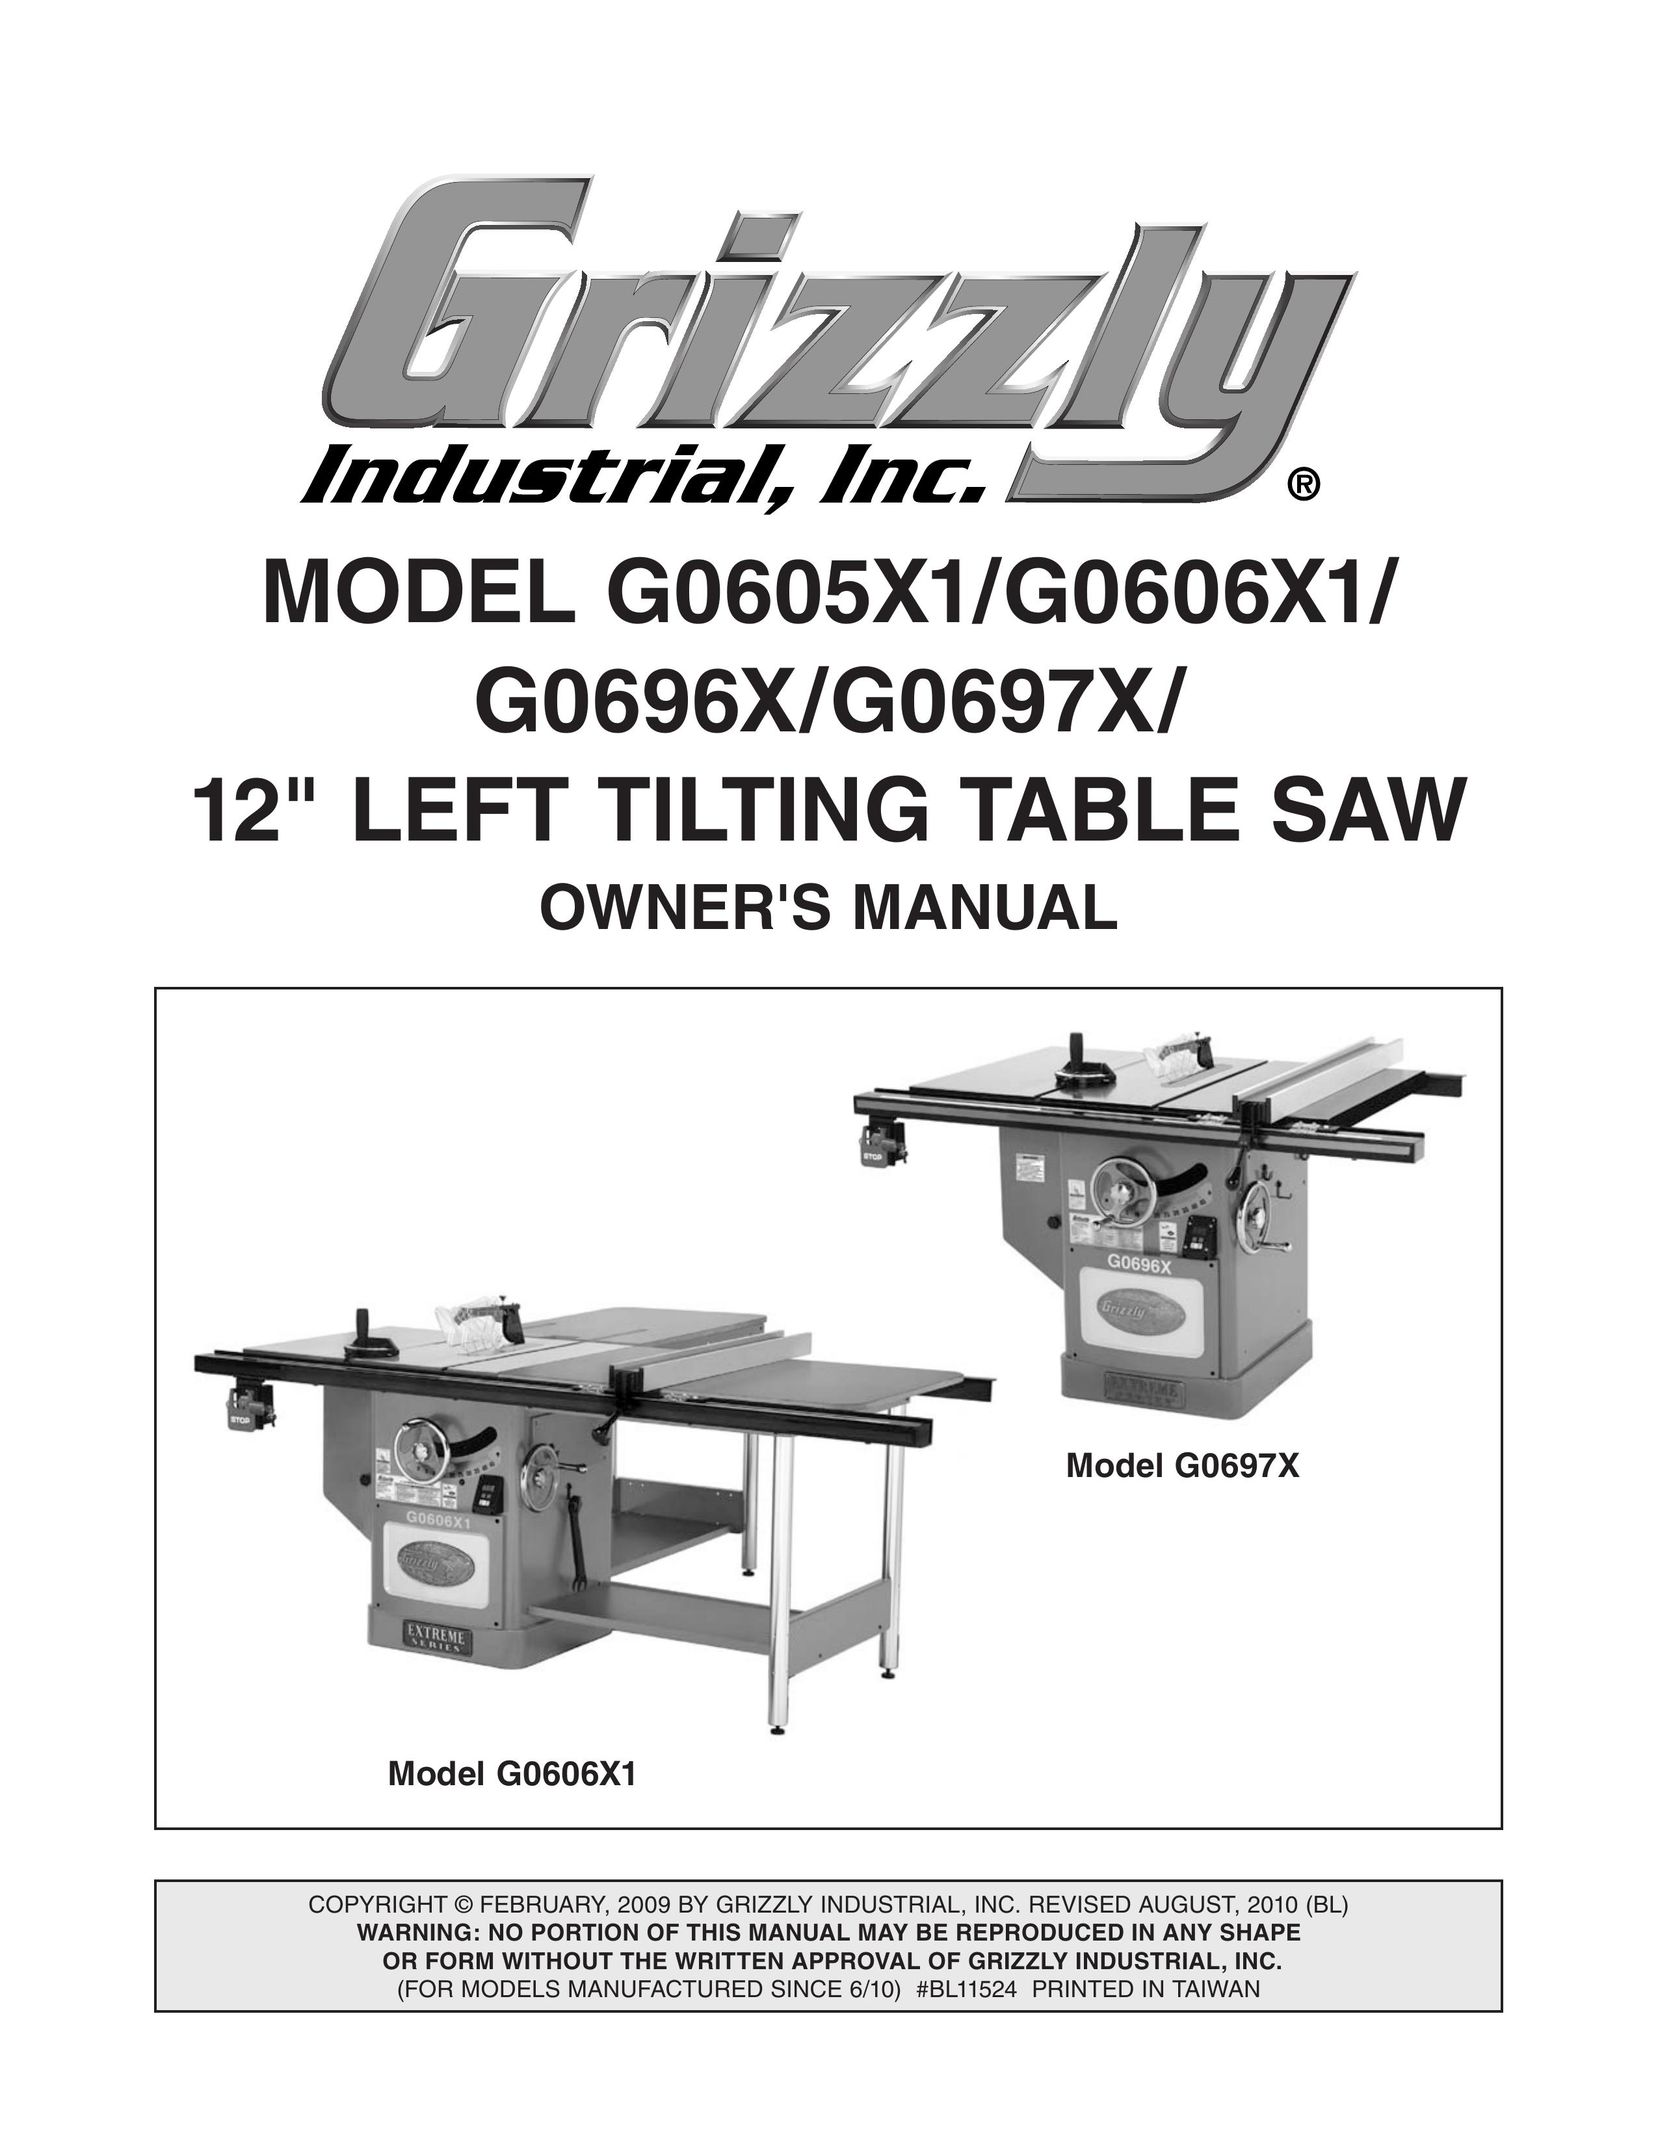 Grizzly G0605X1 Paint Sprayer User Manual